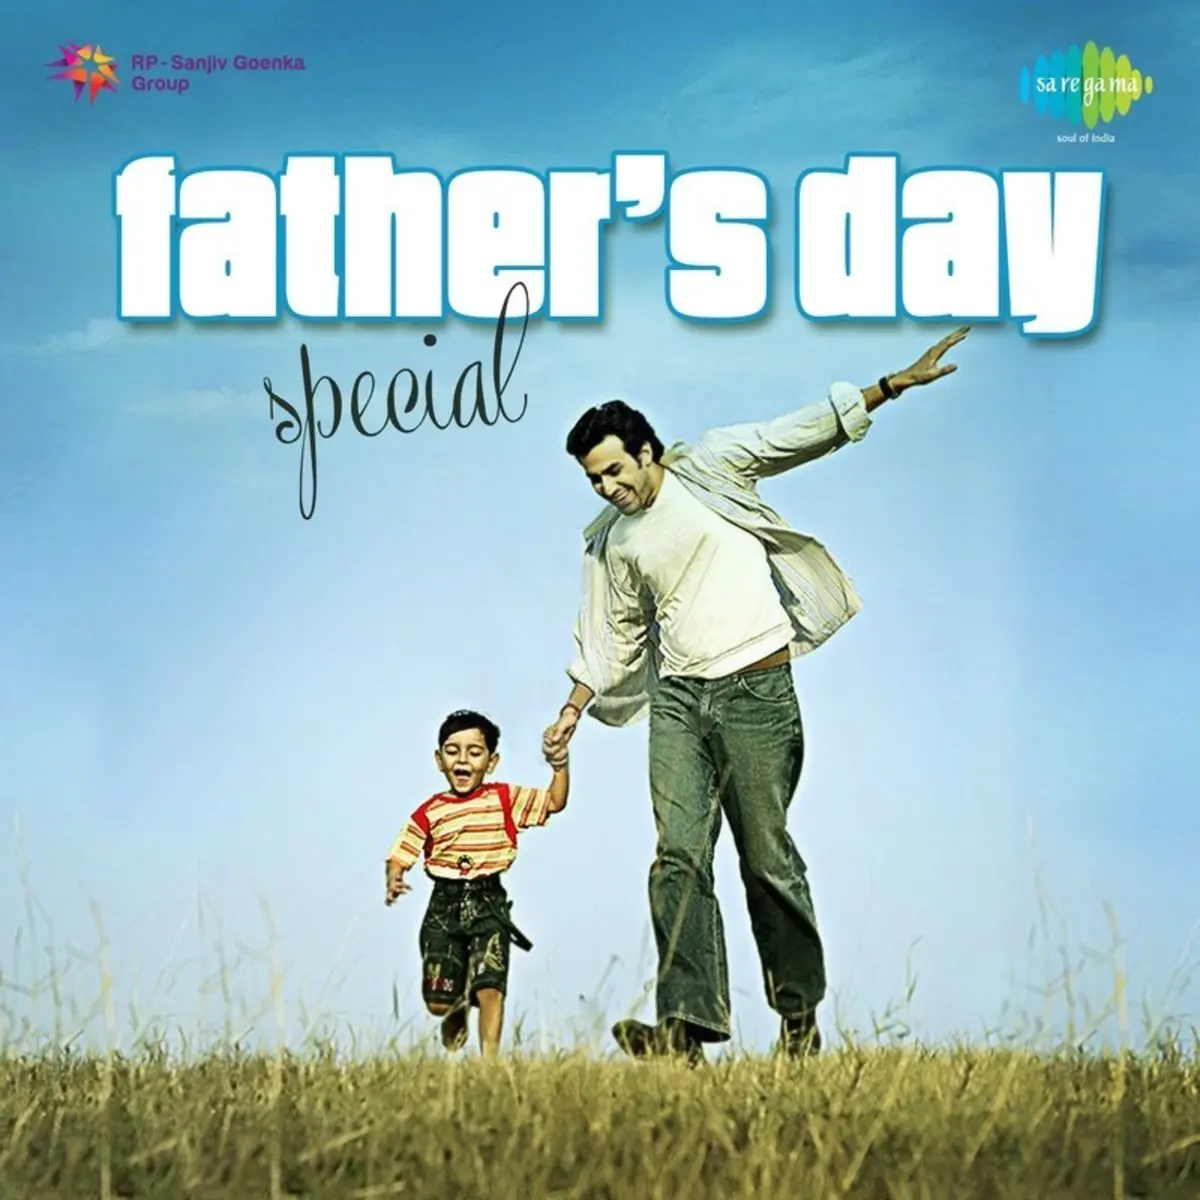 Download Fathers Day Songs Download Fathers Day Mp3 Songs Online Free On Gaana Com